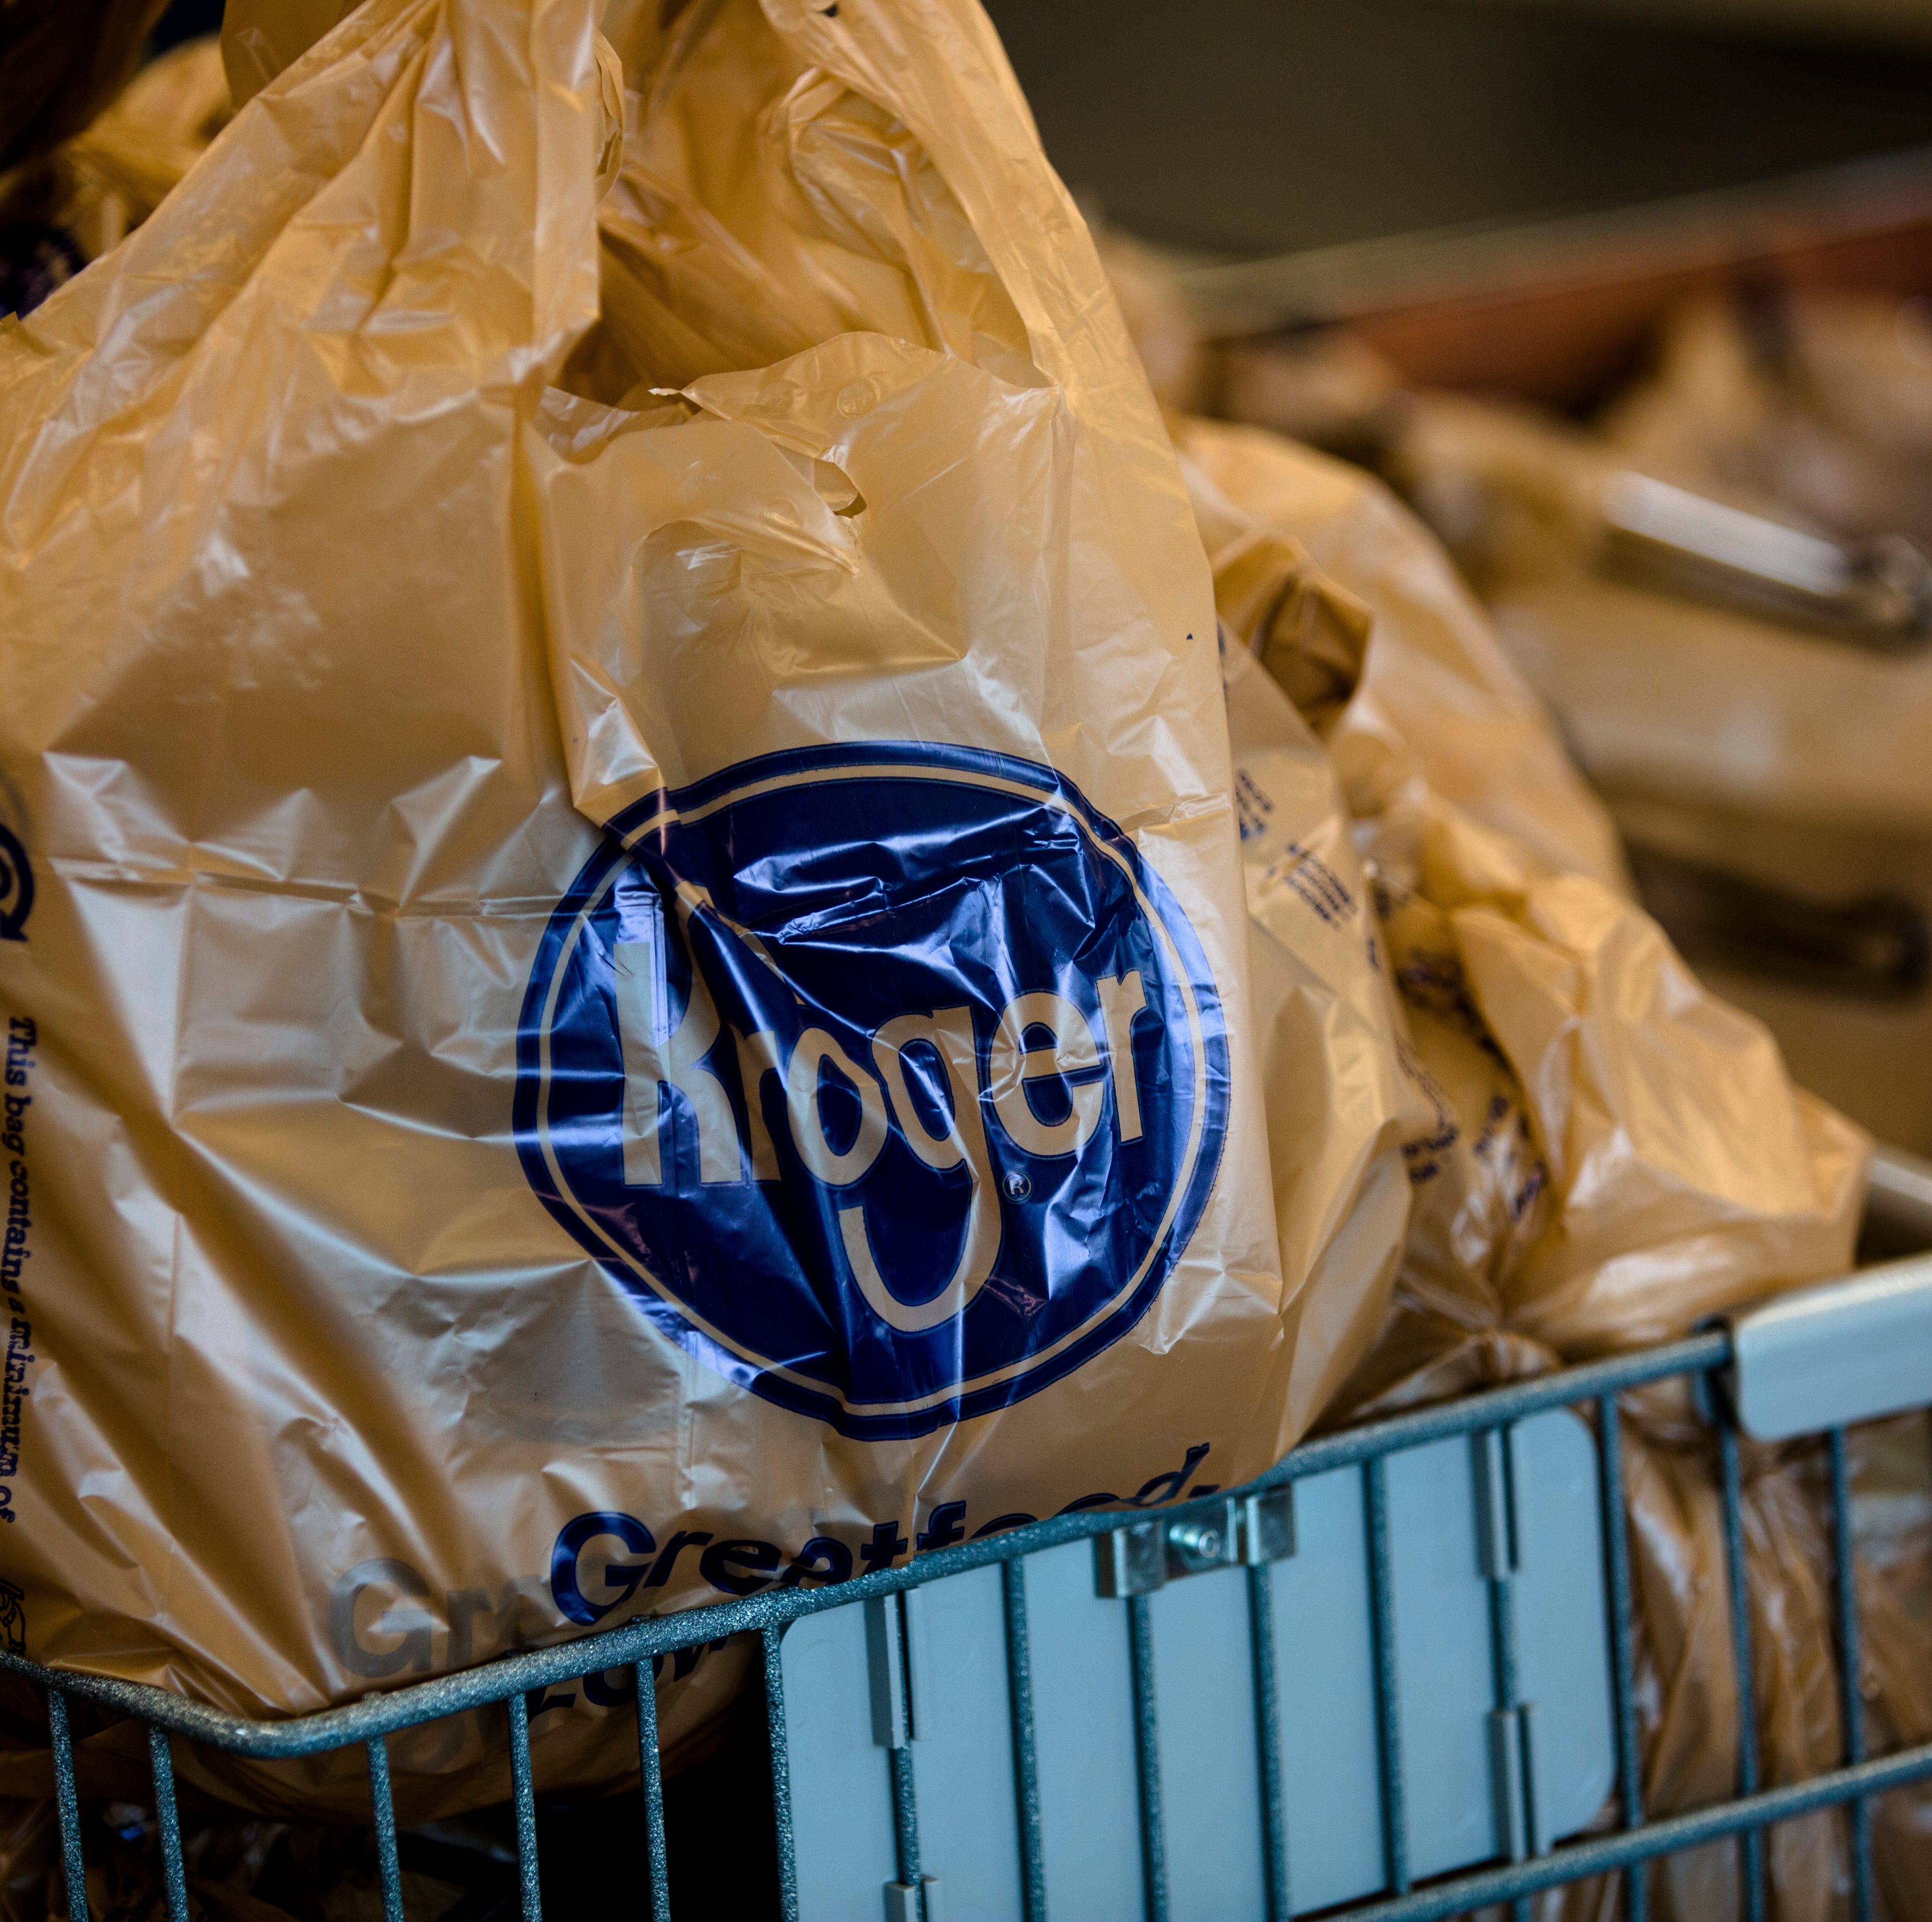 Kroger bags full of items sit in a cart at Kroger in Newport, Ky., on Wednesday, Aug. 22, 2018.